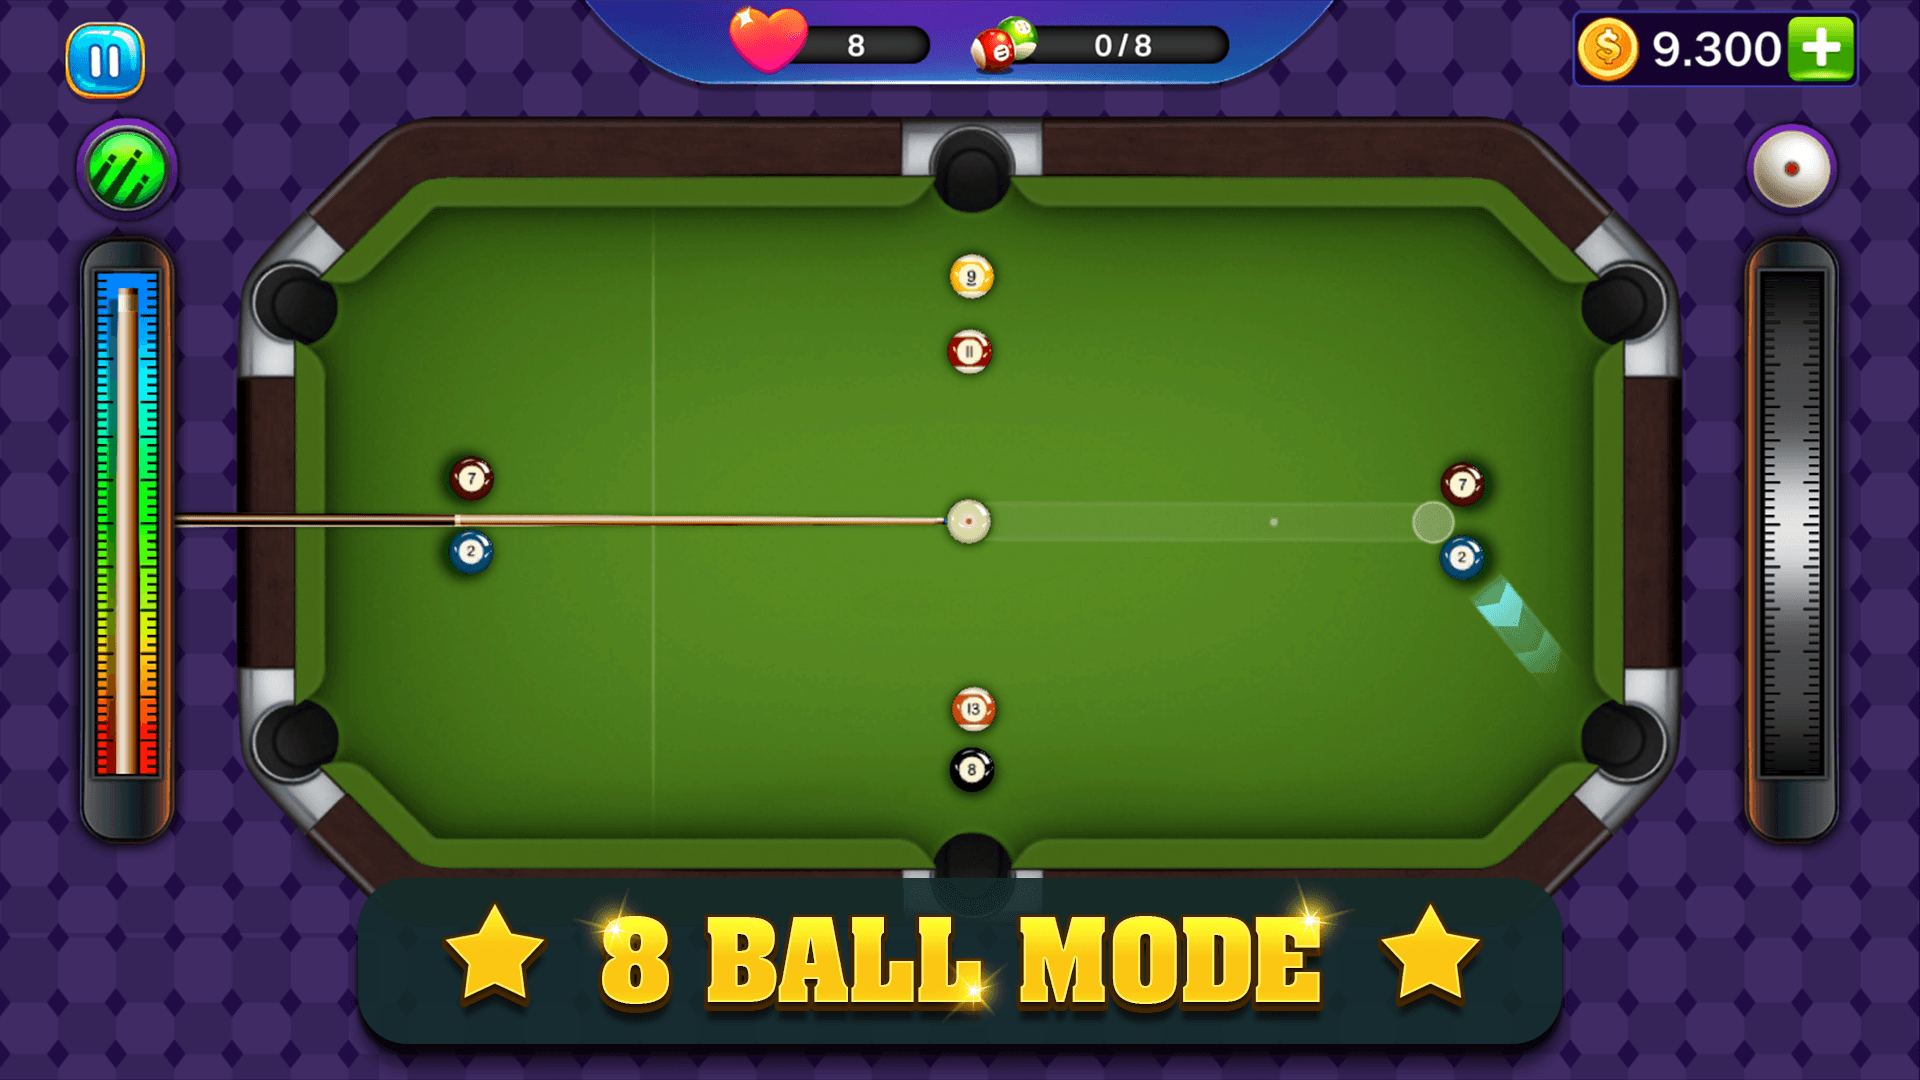 8 Ball Pool on X: Coming soon to 8 Ball Pool 9 Ball mode! Find